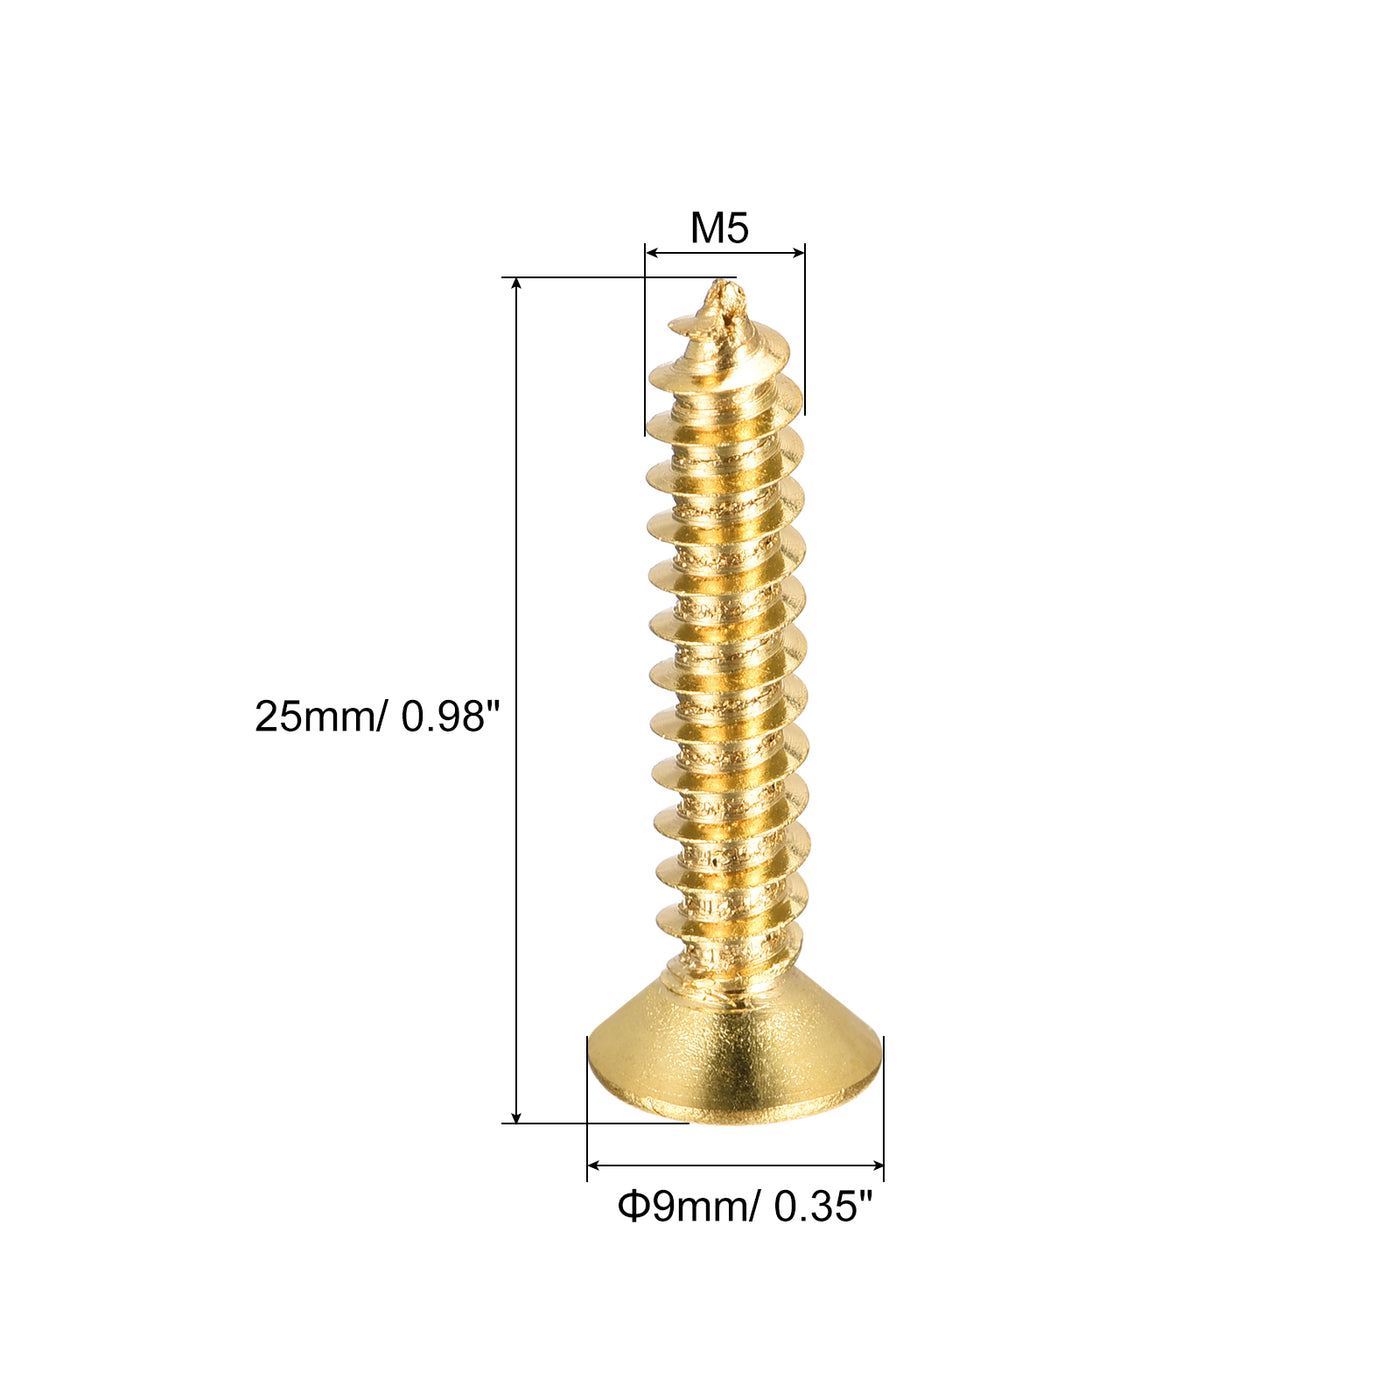 uxcell Uxcell Brass Wood Screws, M5x25mm Phillips Flat Head Self Tapping Connector for Door Hinges, Wooden Furniture, Home Appliances 16Pcs